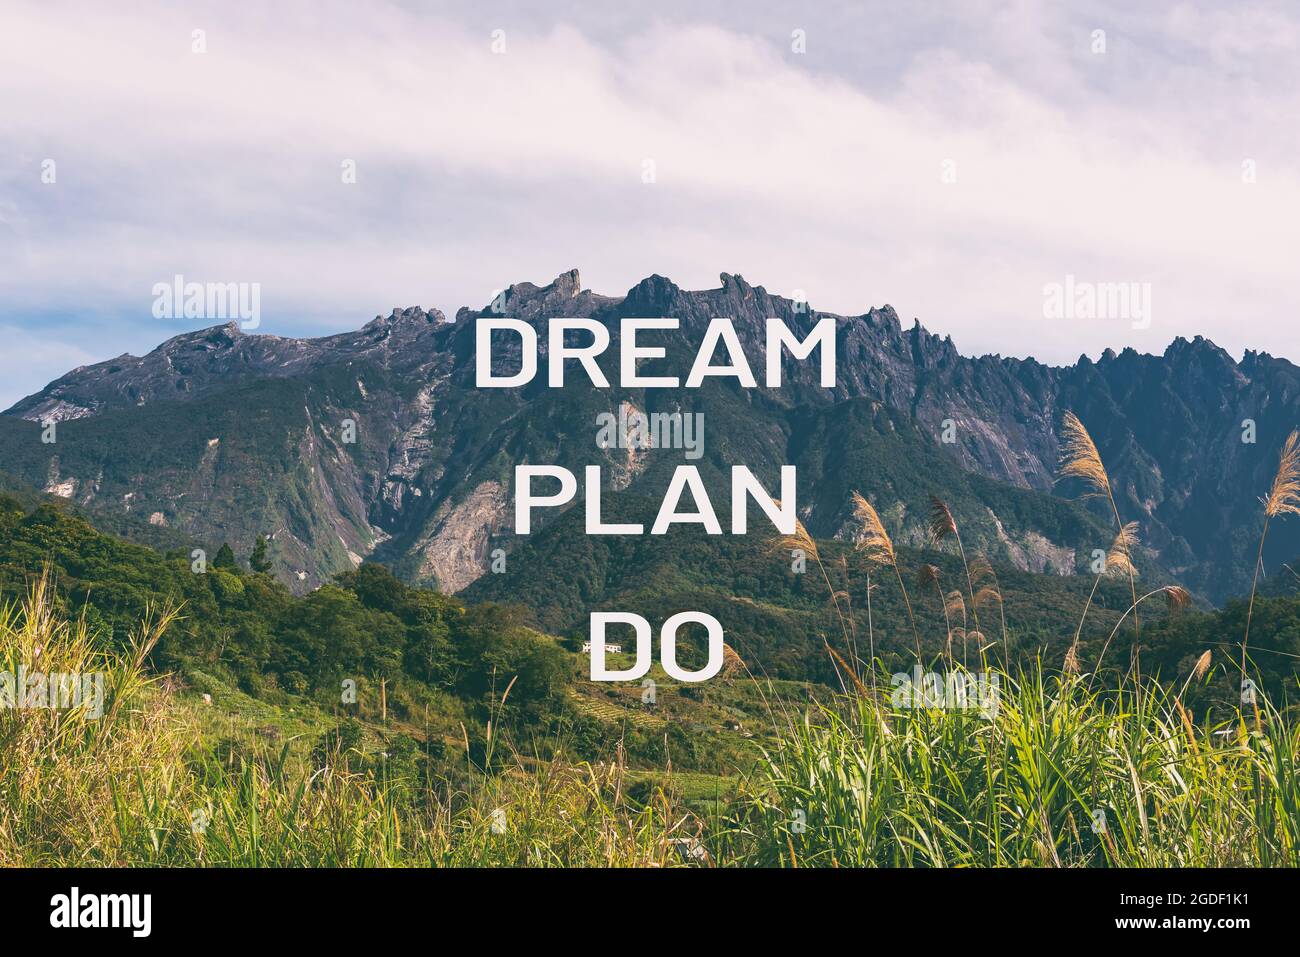 Motivational and Inspirational Quotes - Dream Plan Do. Stock Photo